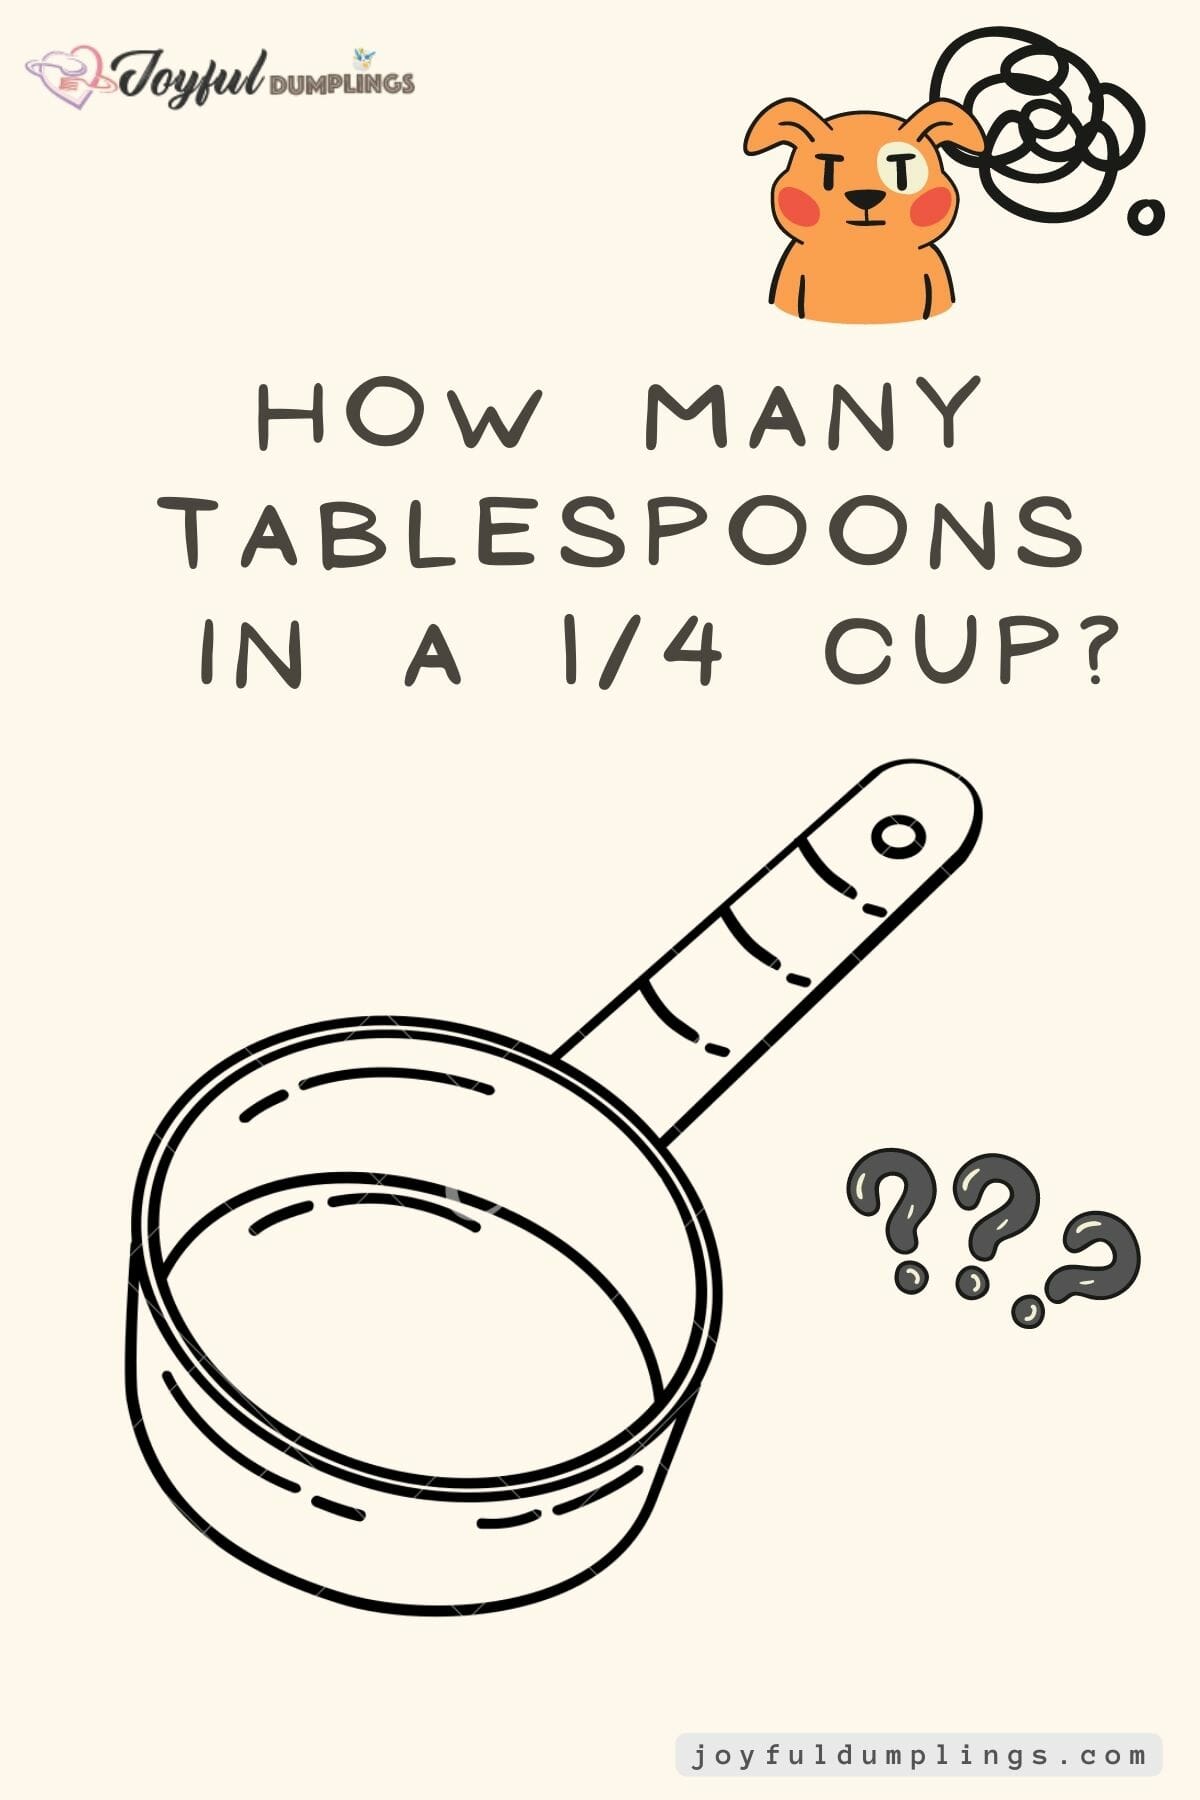 How Many Tablespoons in A 1/4 Cup?